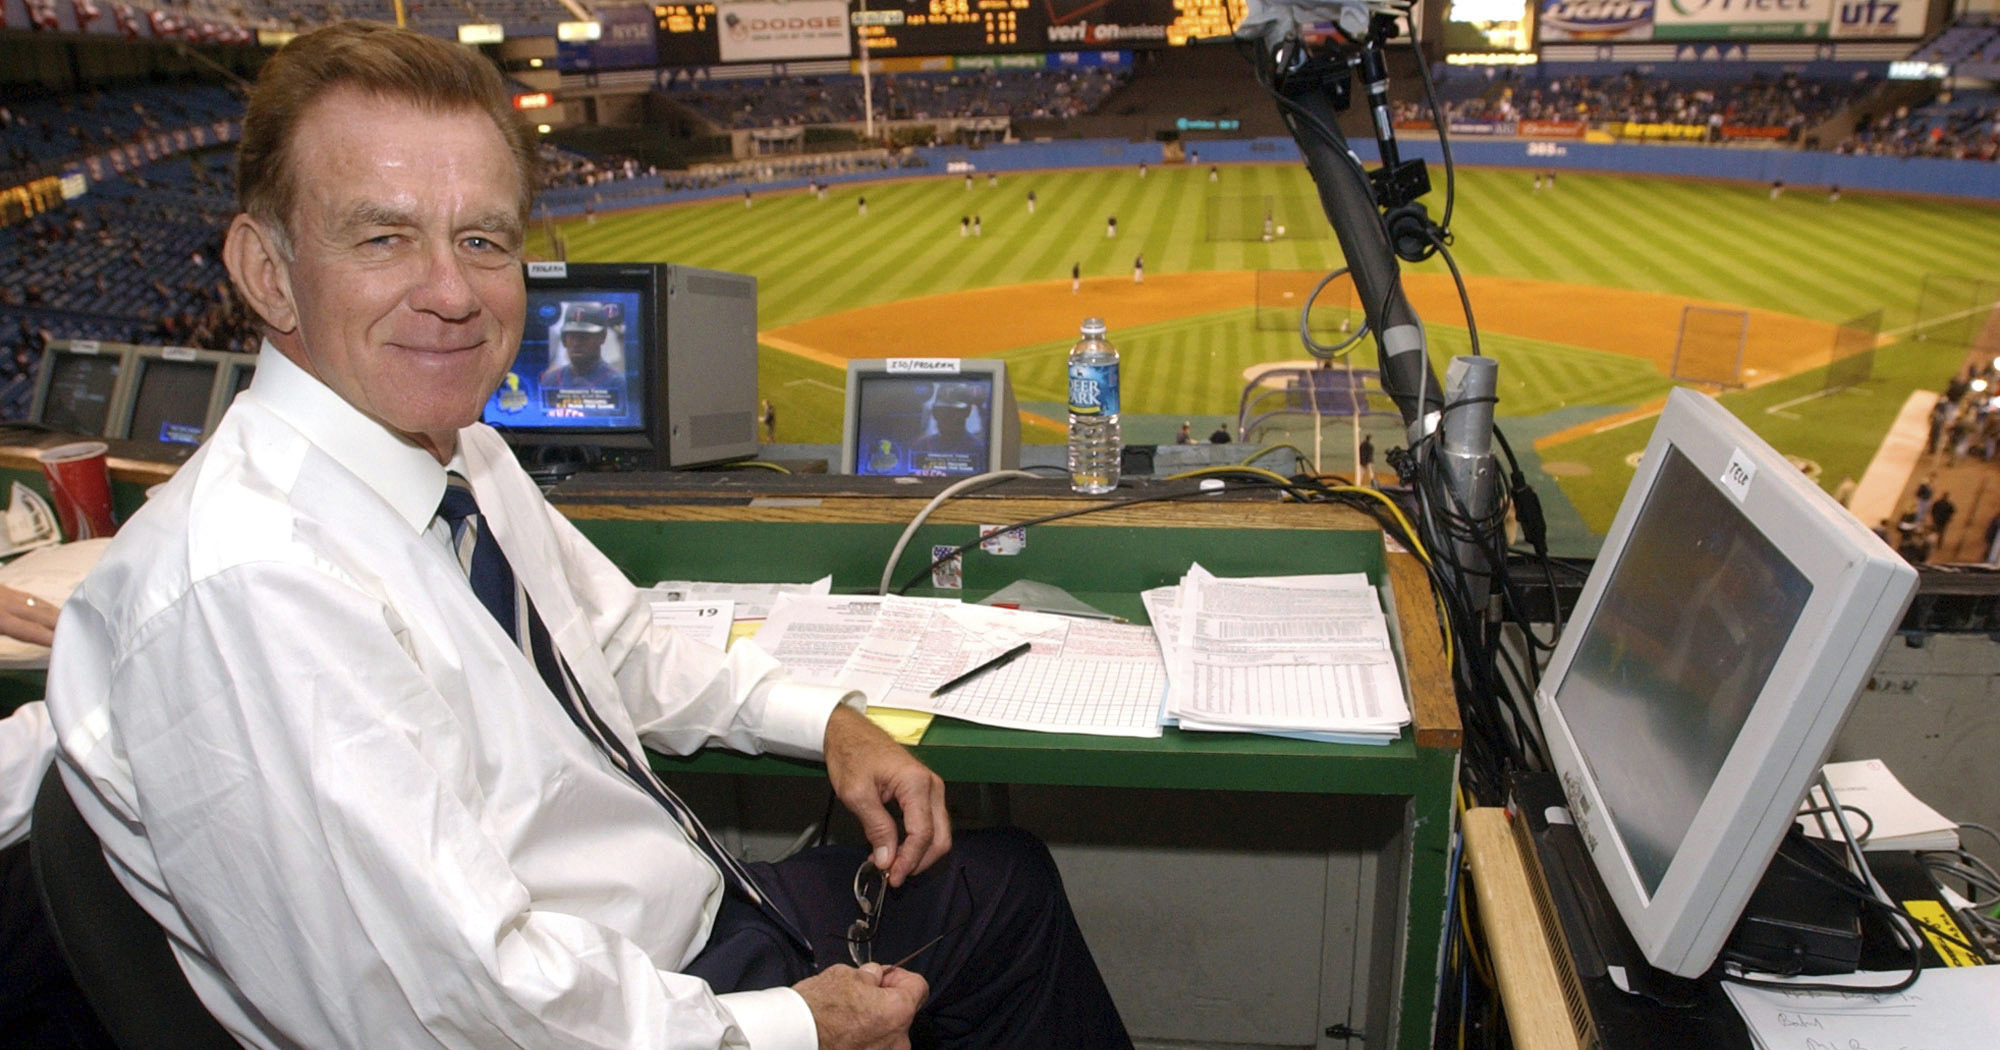 Baseball announcer Tim McCarver poses in the press box before the start of Game 2 of the American League Division Series in New York on Oct. 2, 2003.